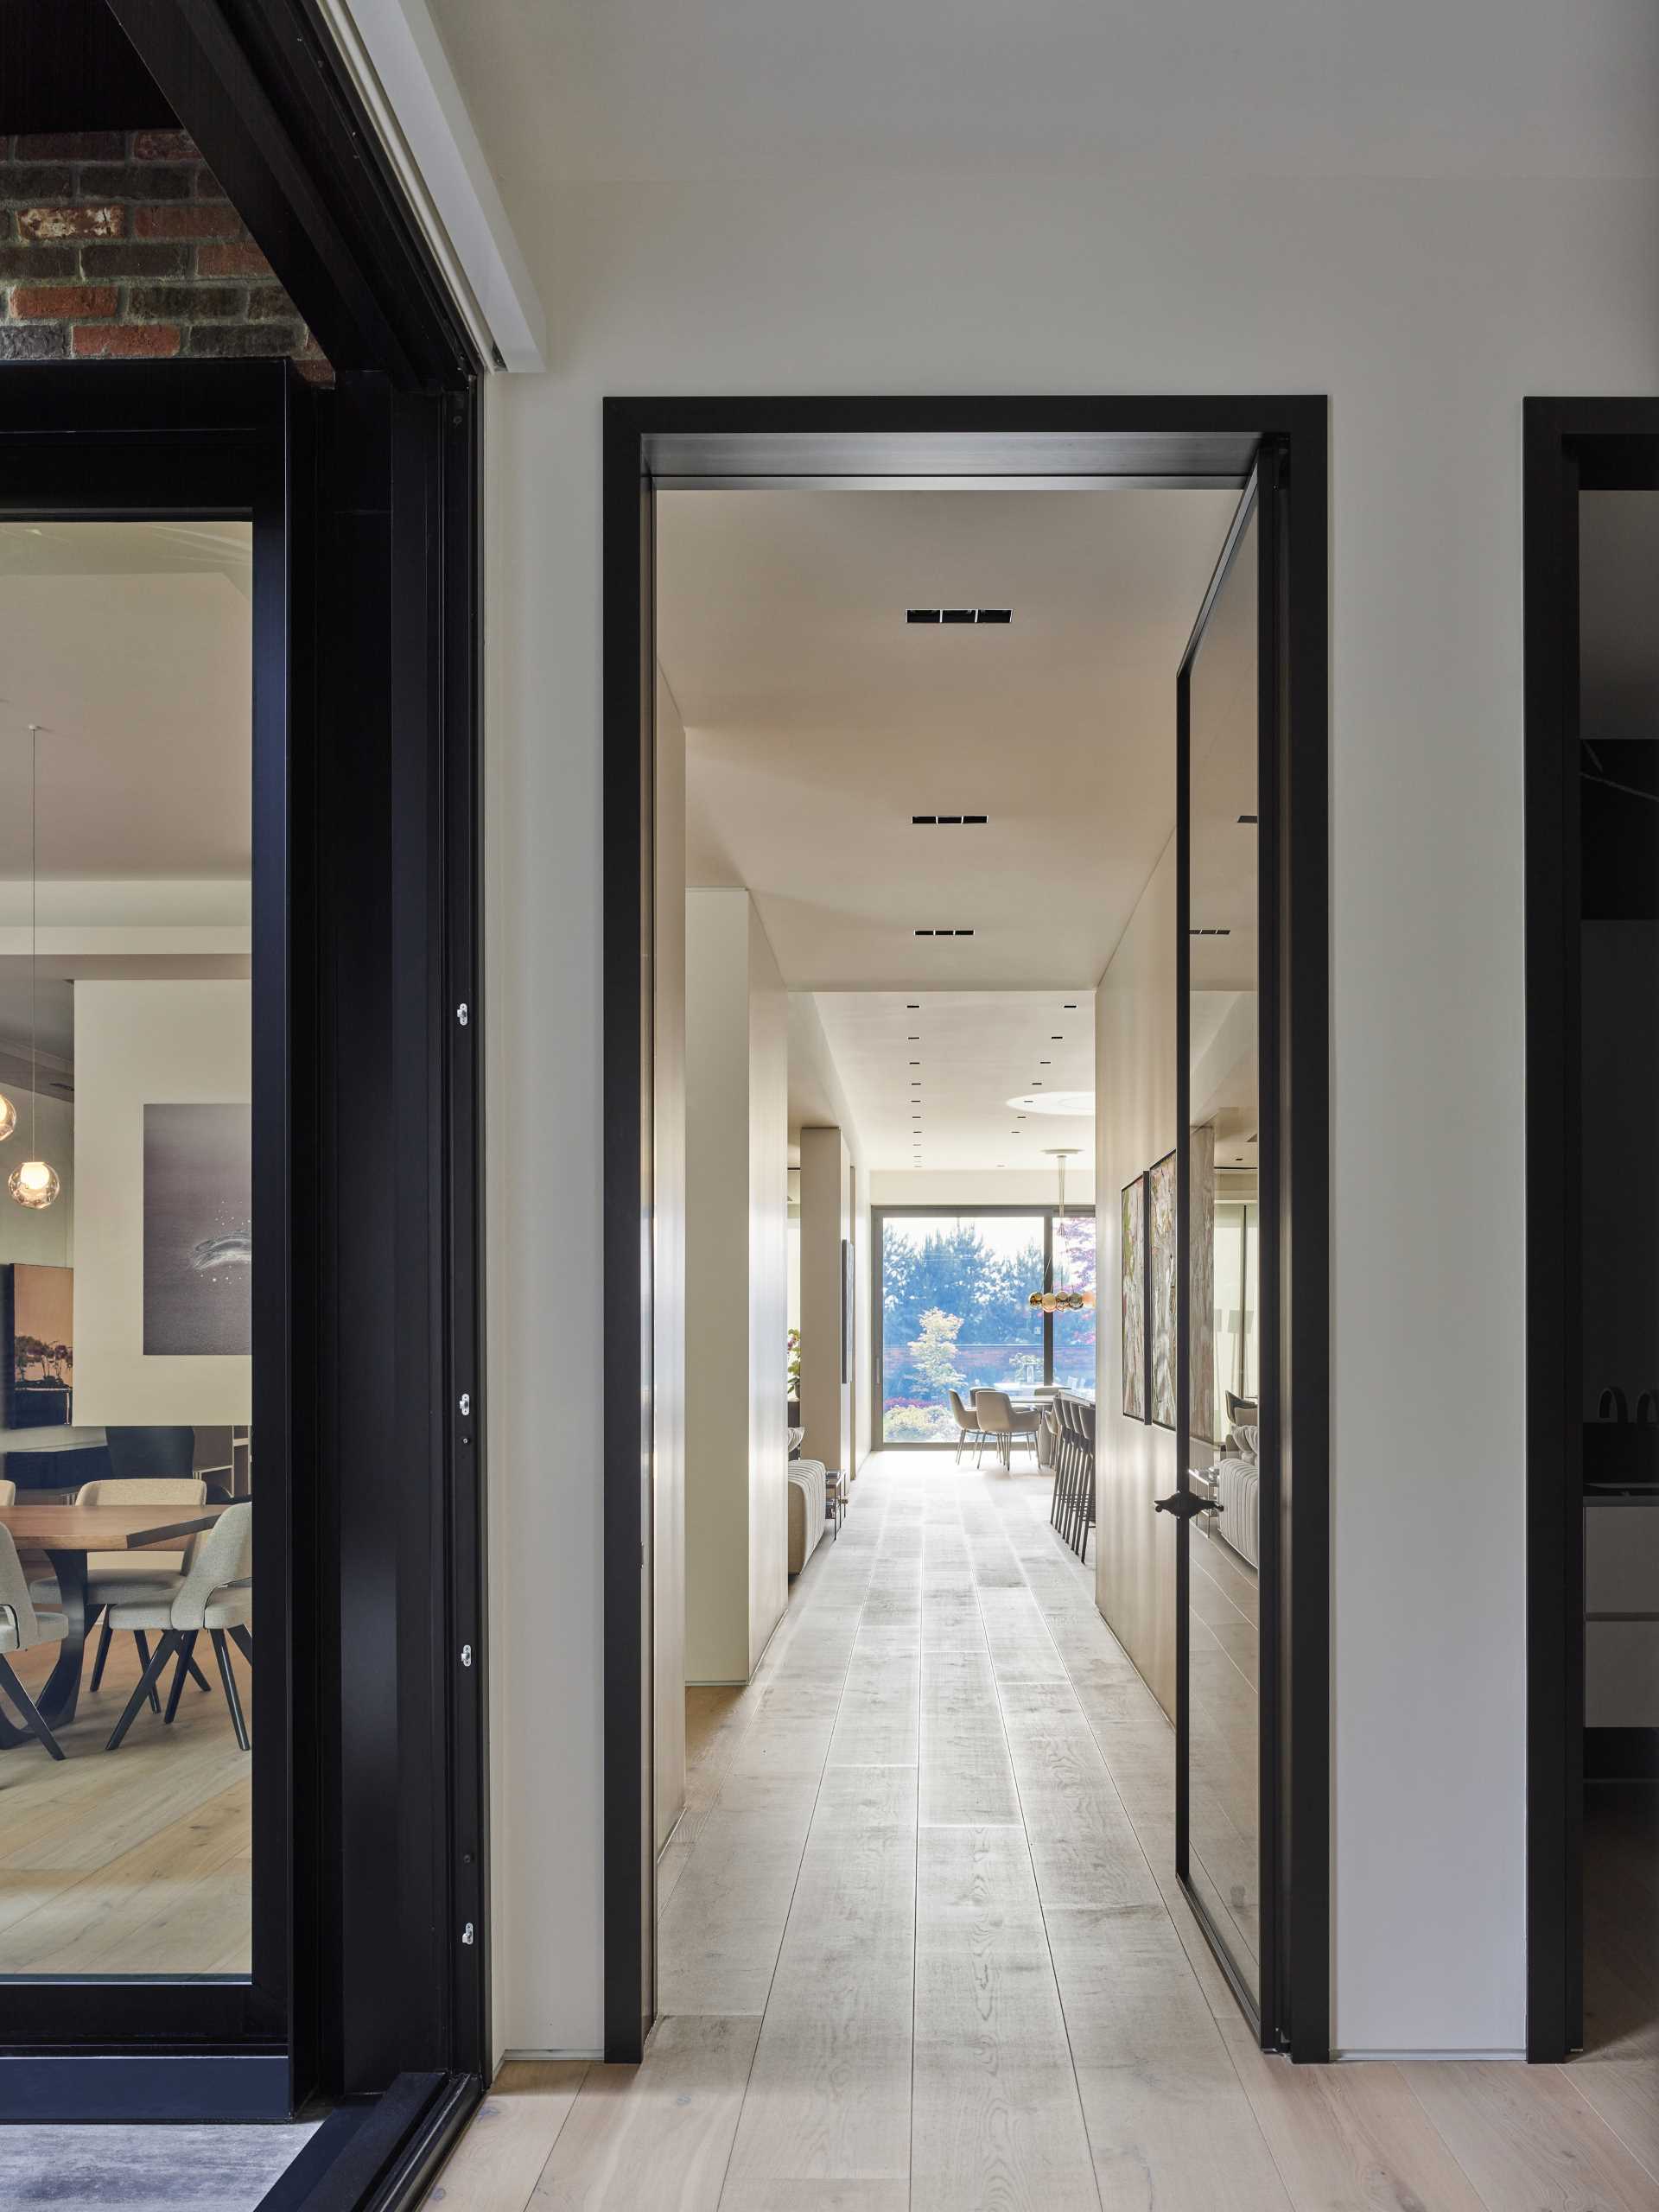 A glass door connects the social areas of the house with the hallway.